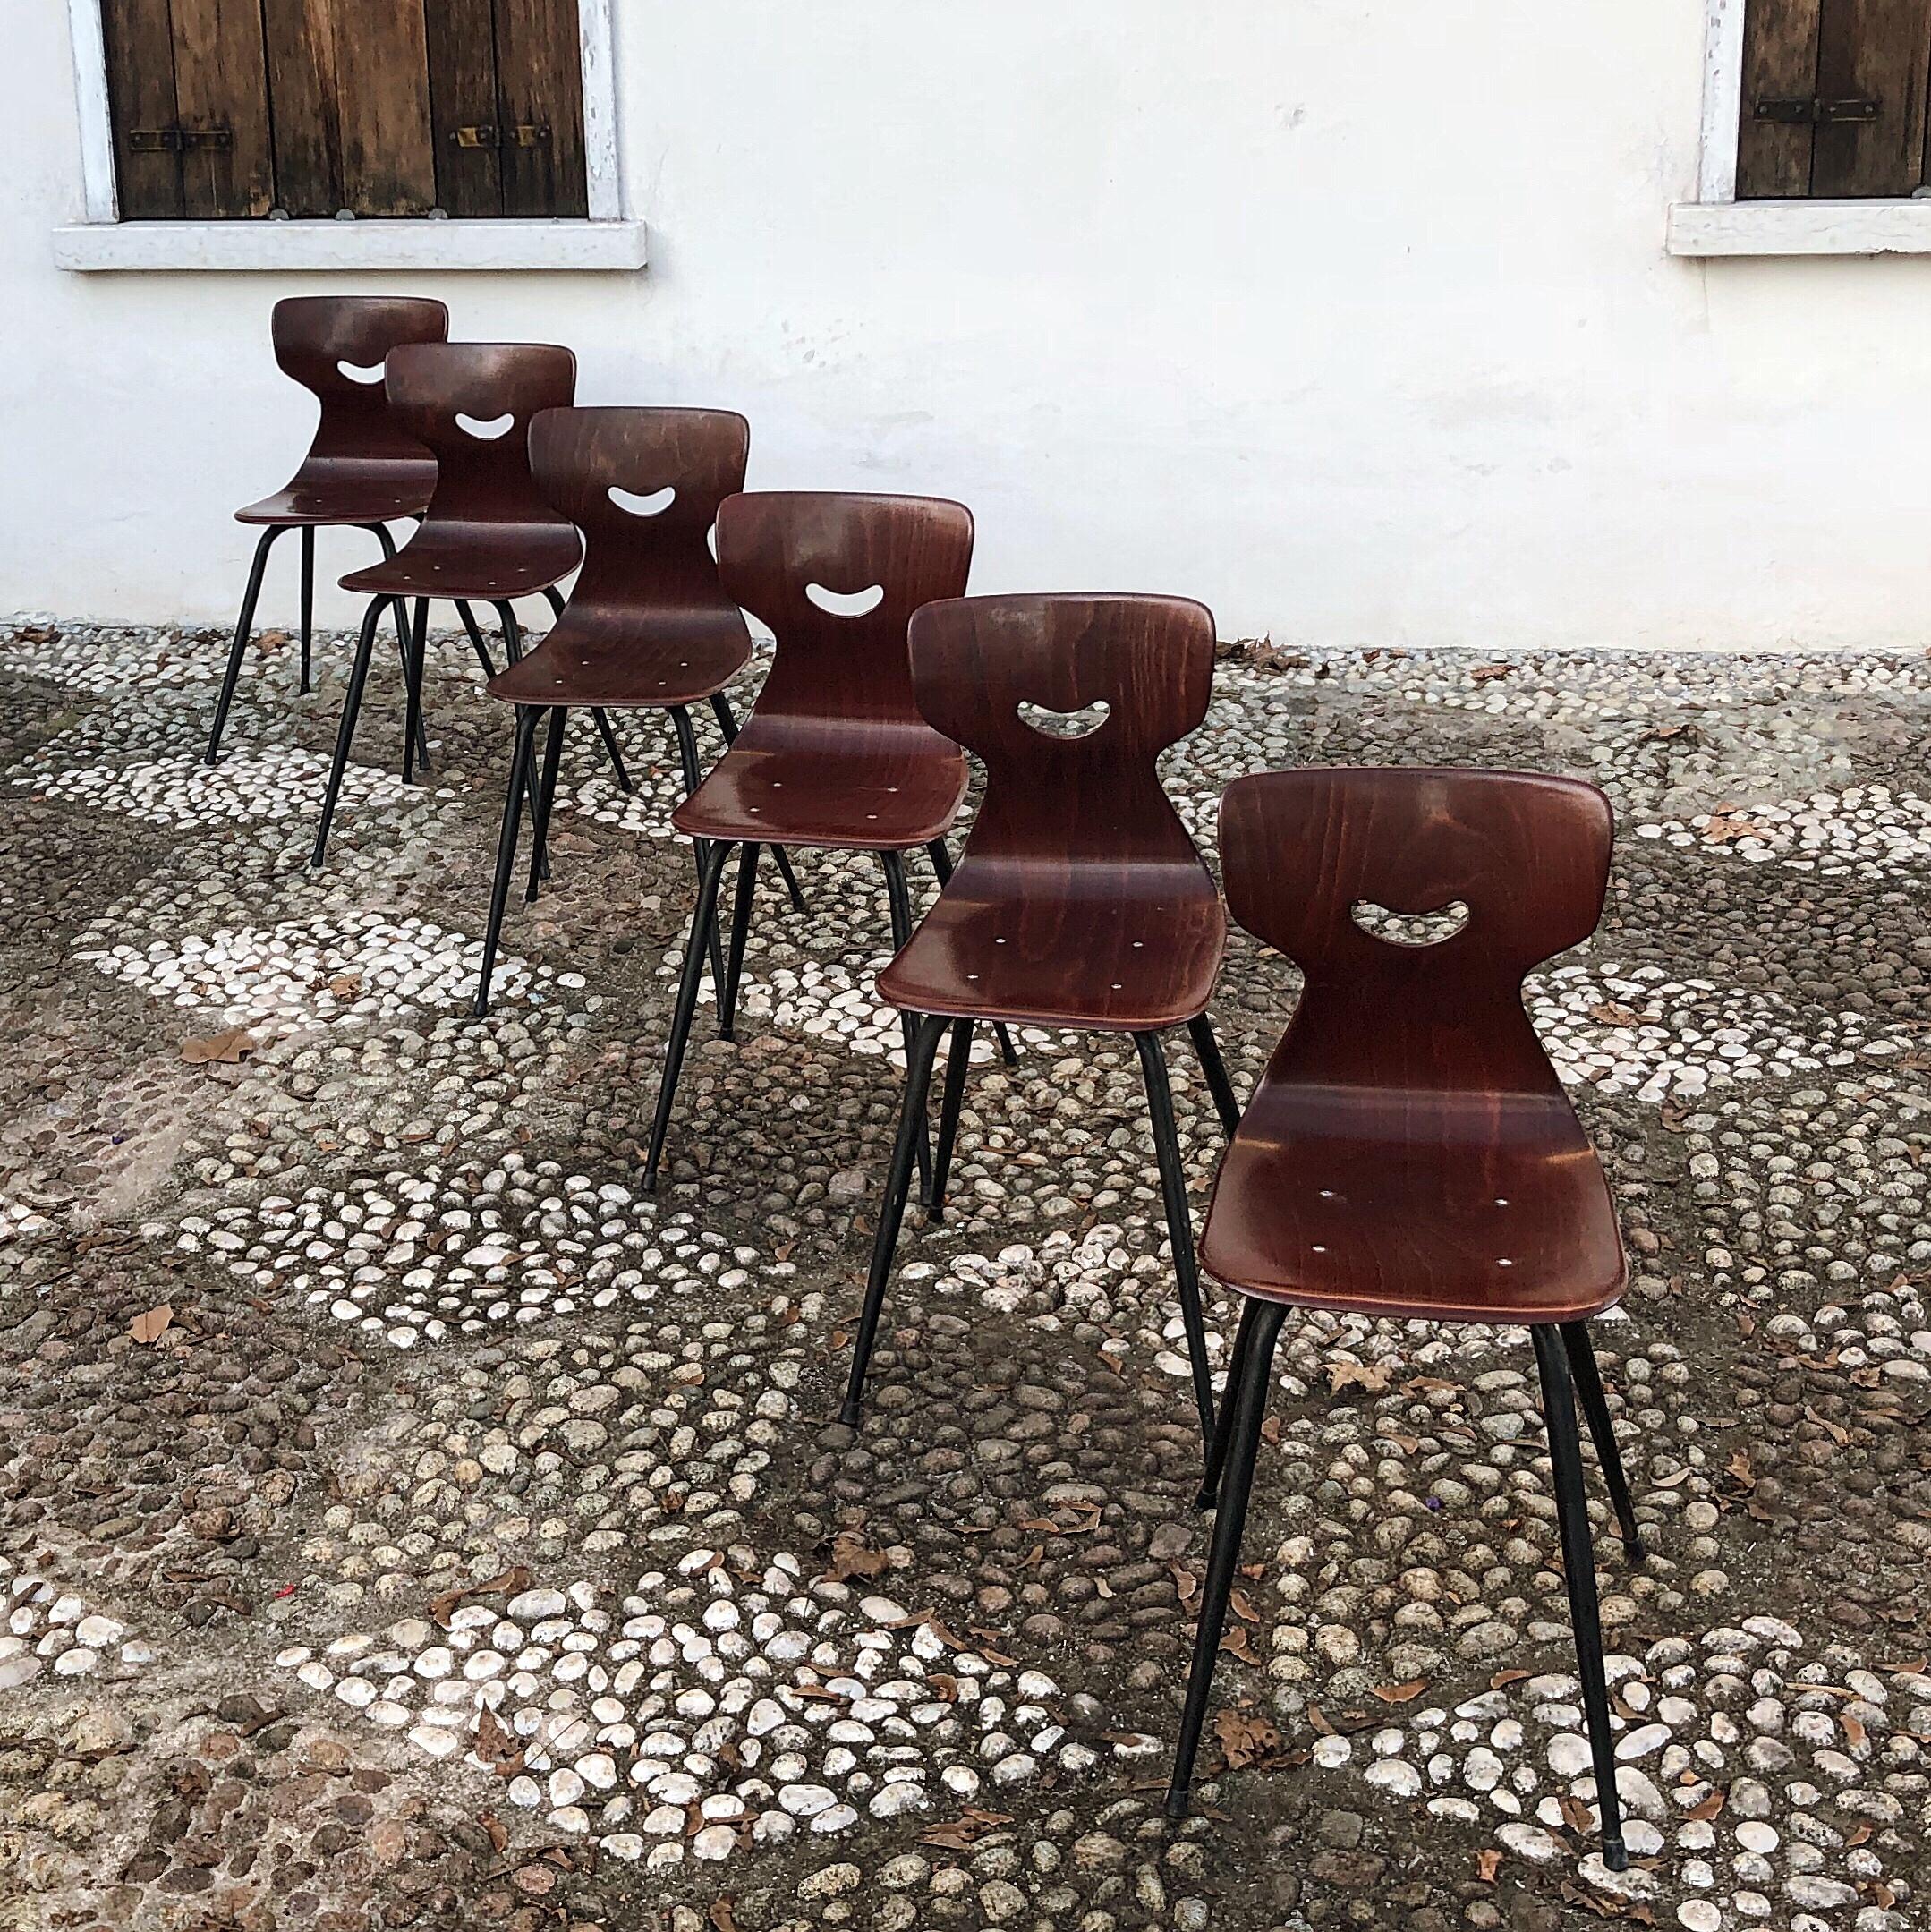 Mid-20th Century Adam Stegner Plywood Midcentury Sculpted Chairs for Pagholz Flottöto, 1950s For Sale